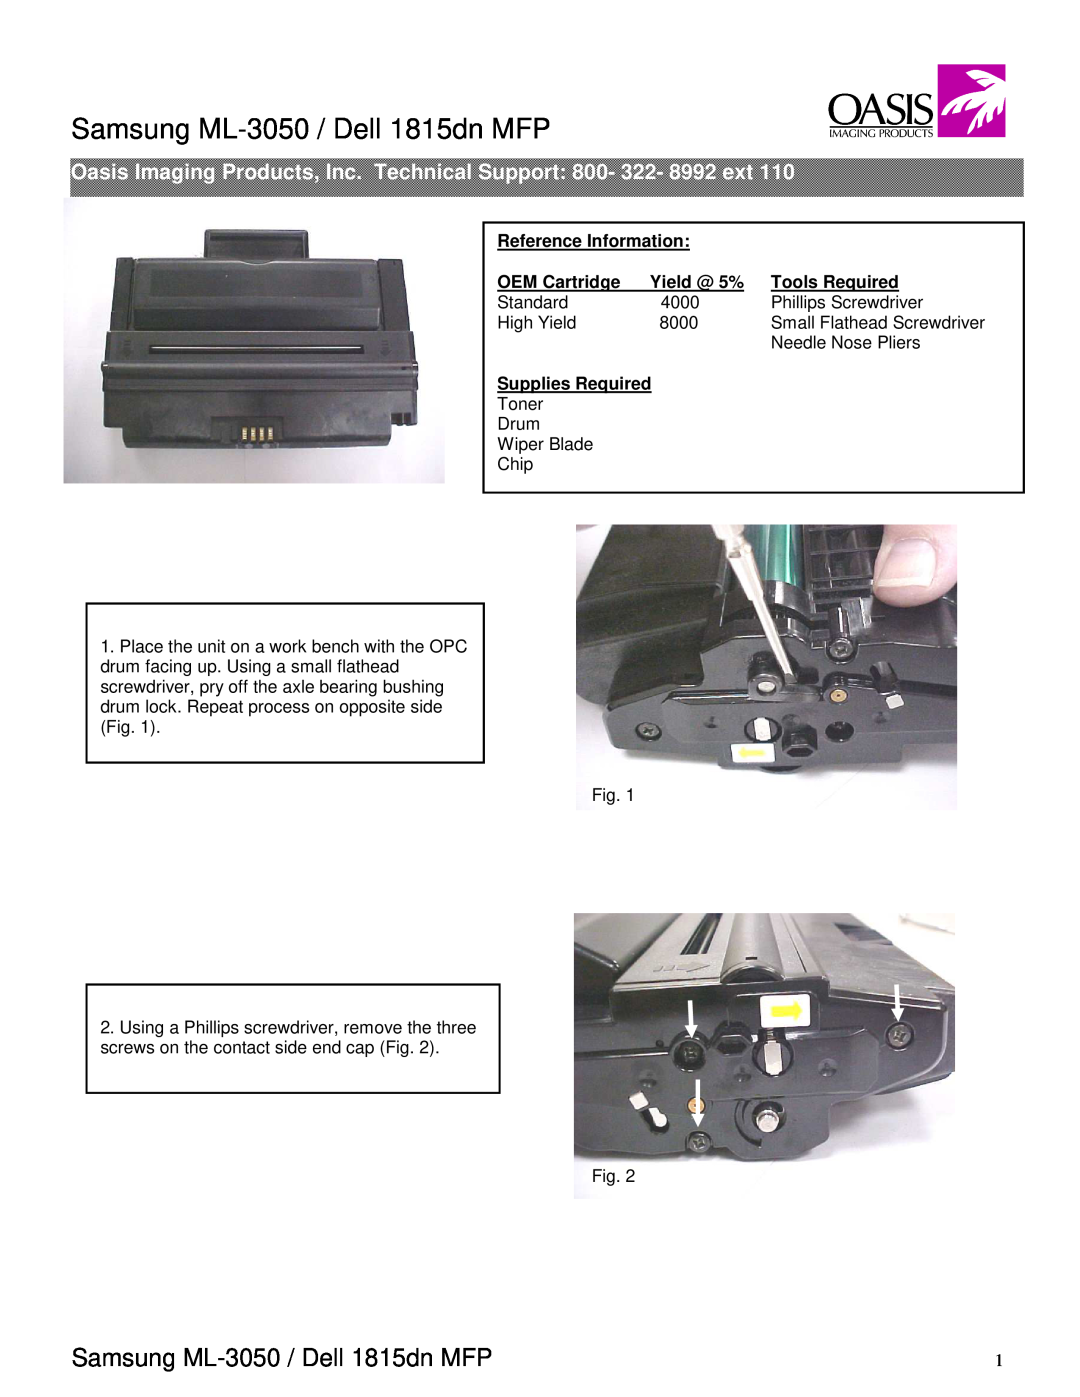 Oasis Concepts manual Samsung ML-3050 /Dell 1815dn MFP, Reference Information, OEM Cartridge, Yield @ 5% 